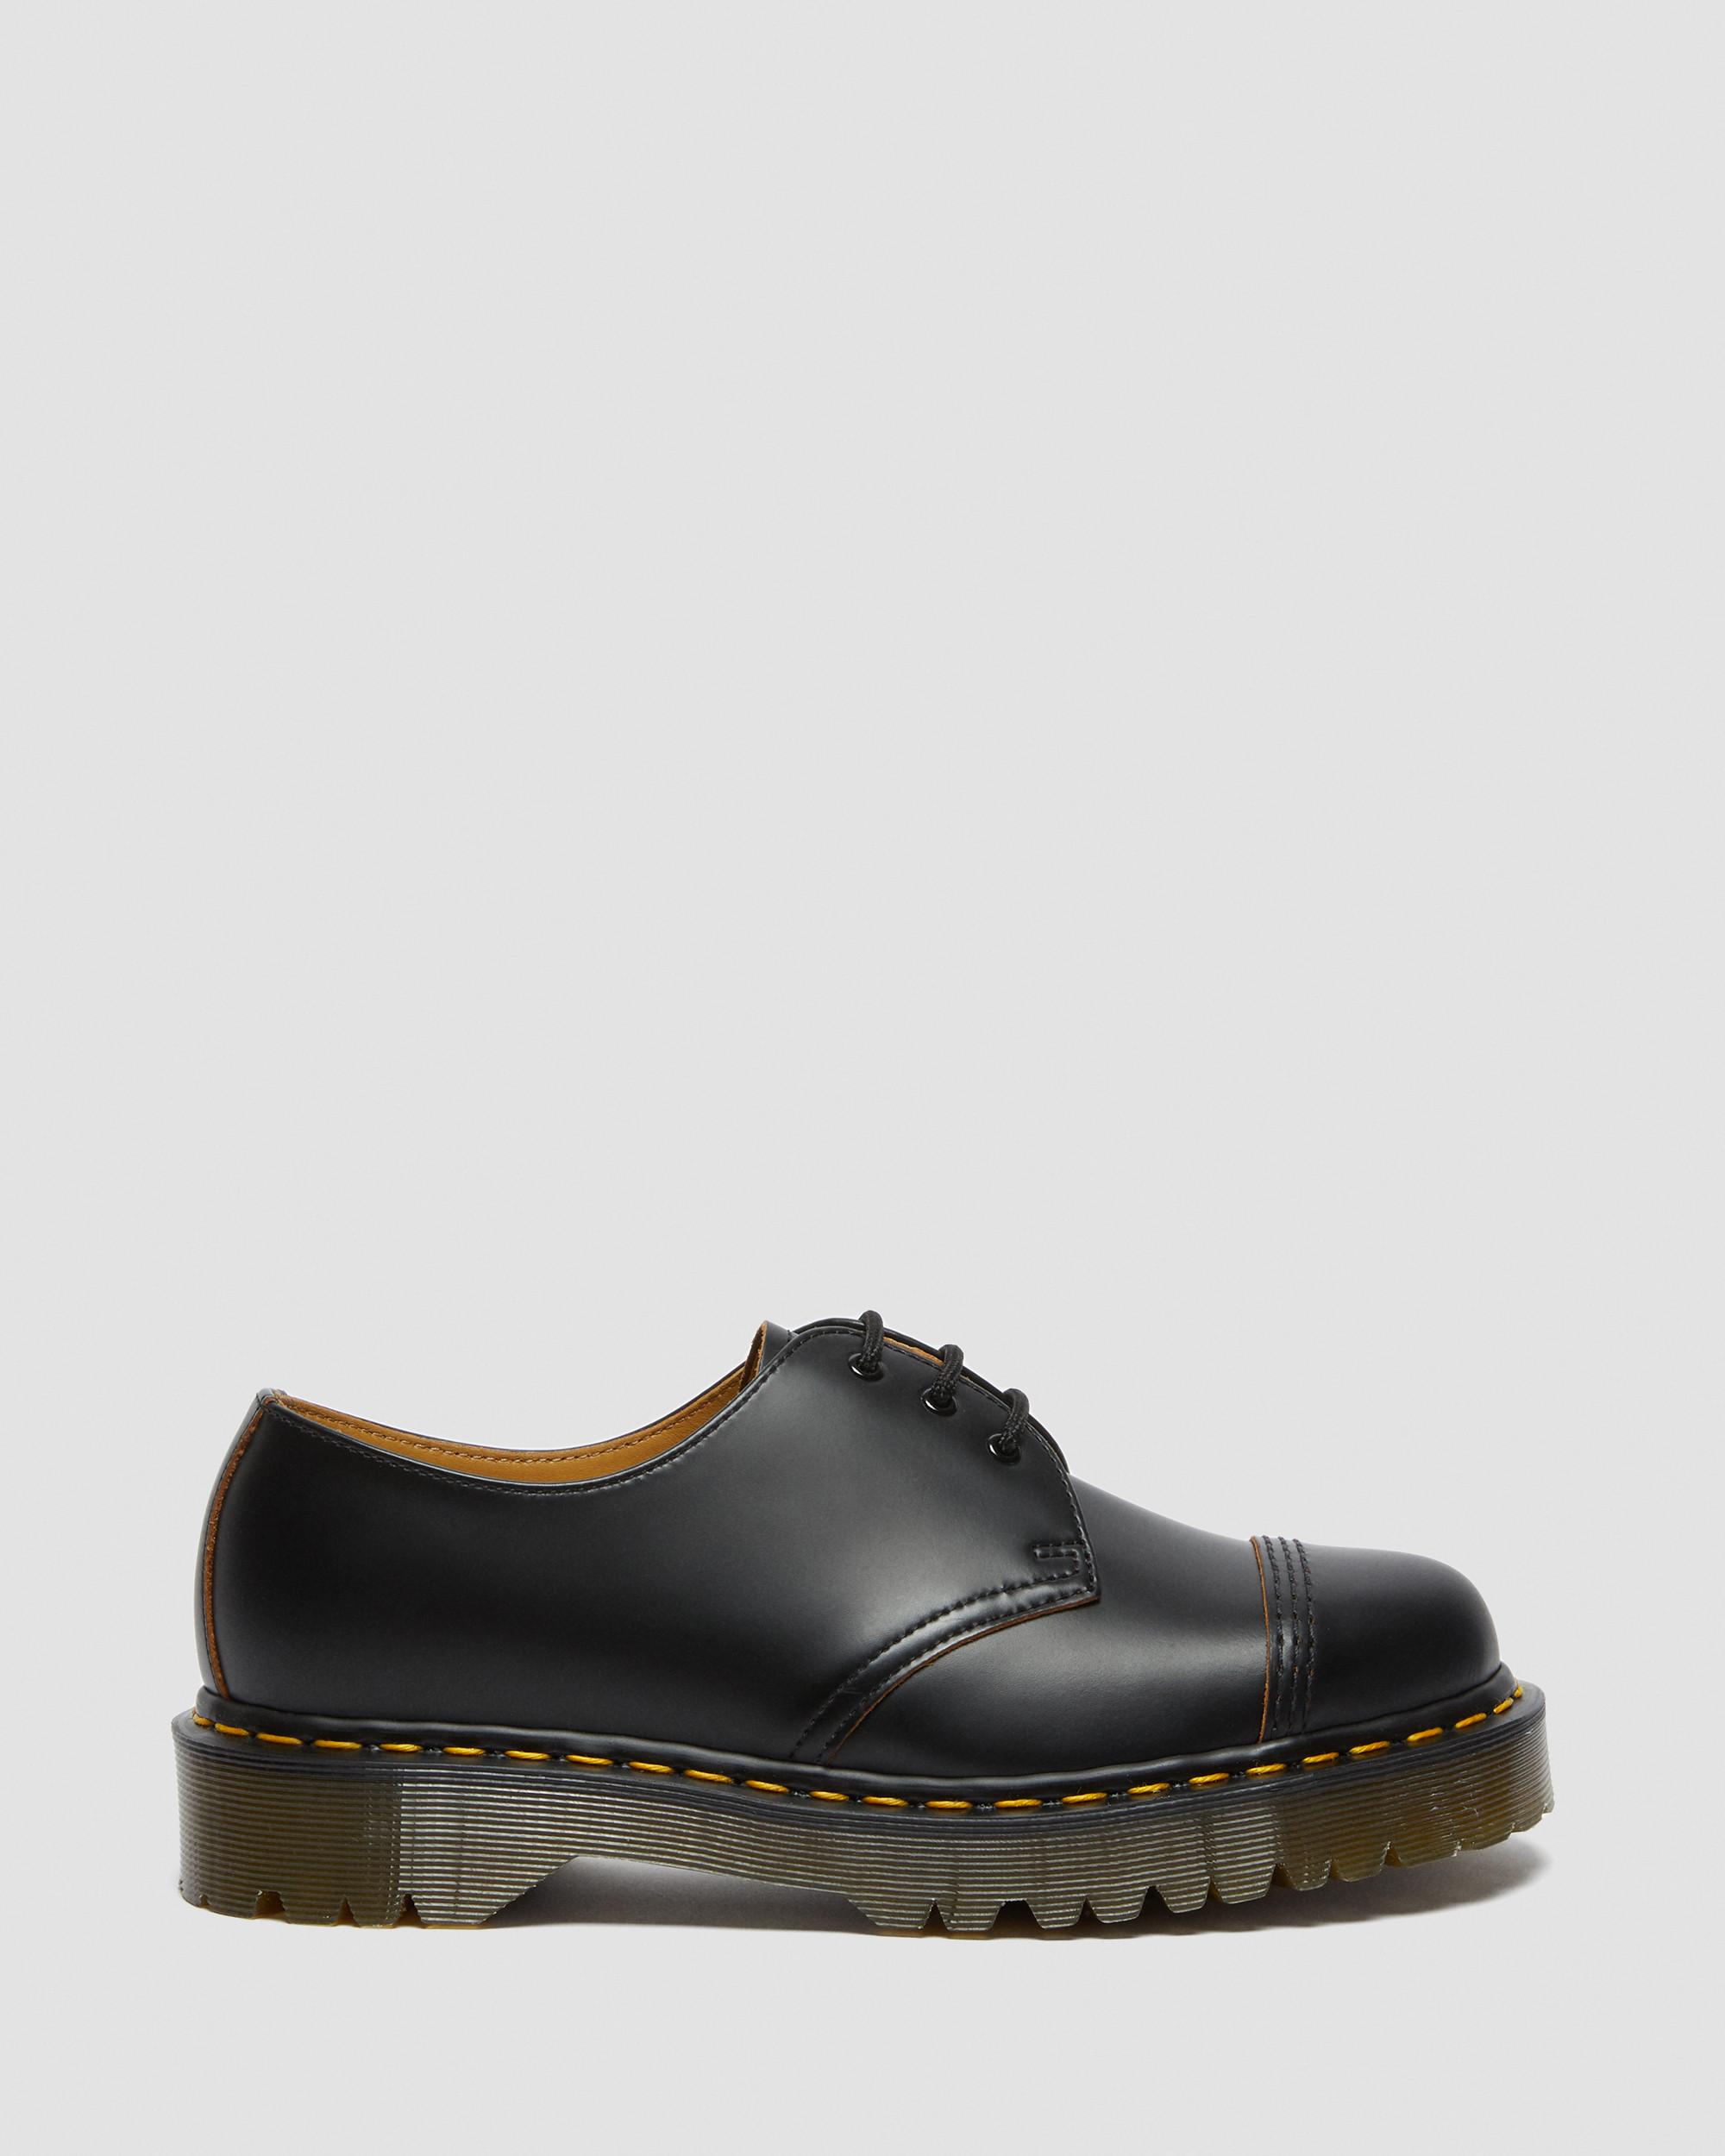 1461 Bex Made in England Toe Cap Oxford Shoes in Black | Dr. Martens